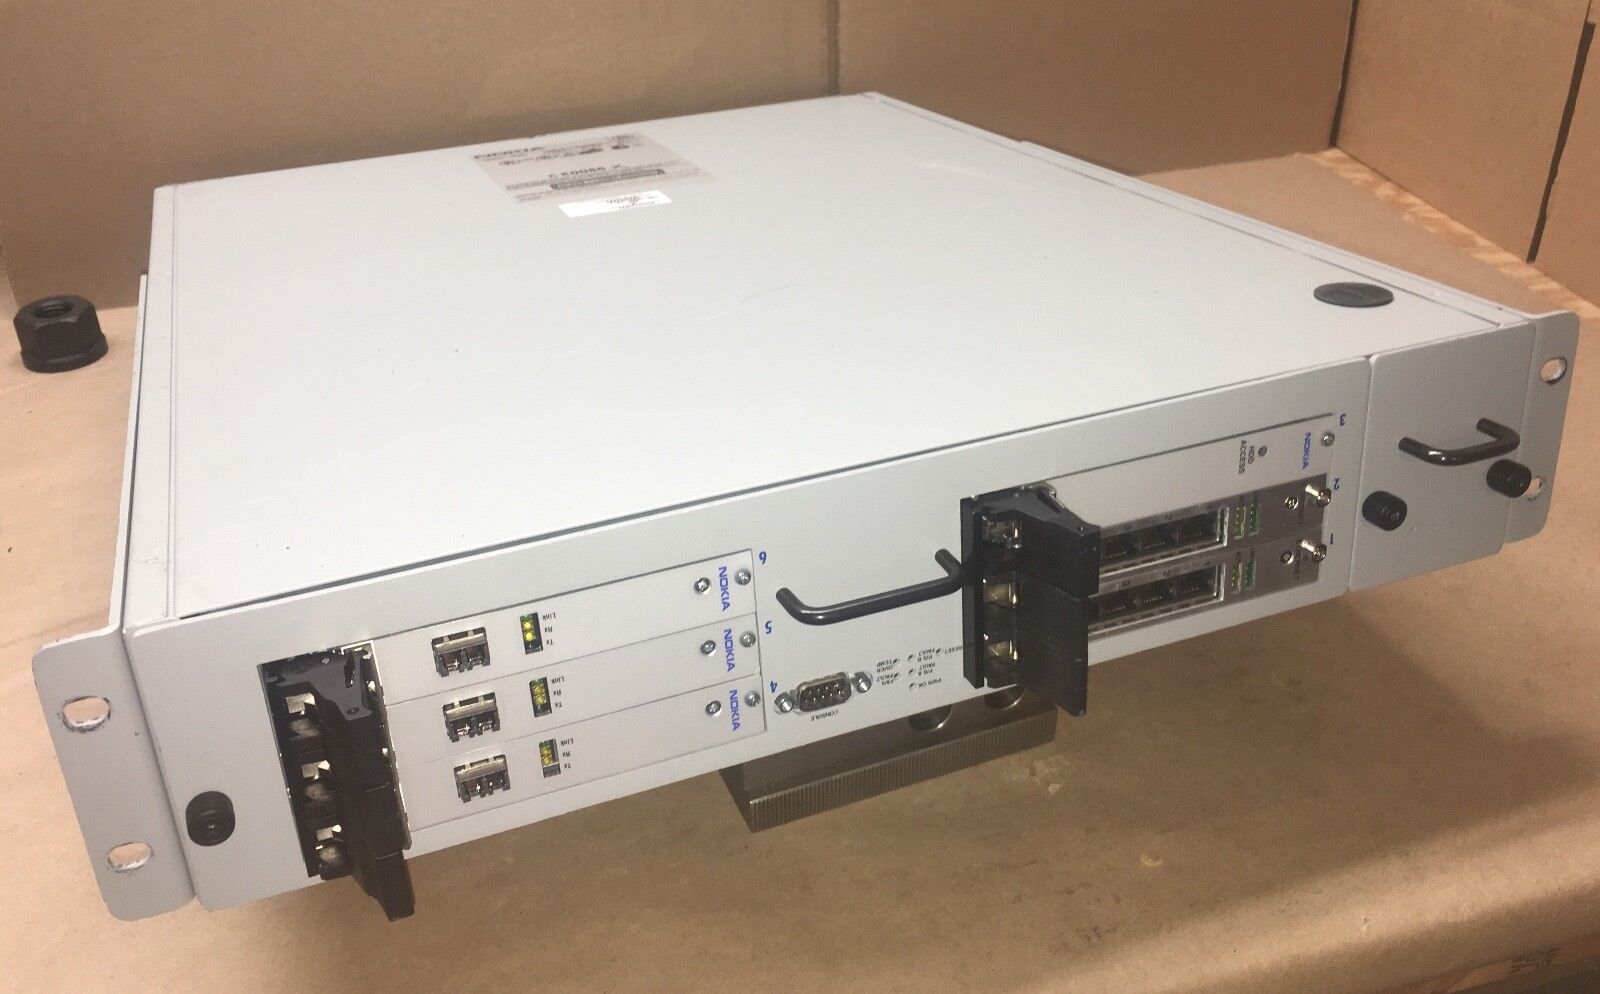 NOKIA IP2650 Integrated Router/Firewall - Class 1 Laser Product - 3/1.5A 50-60Hz